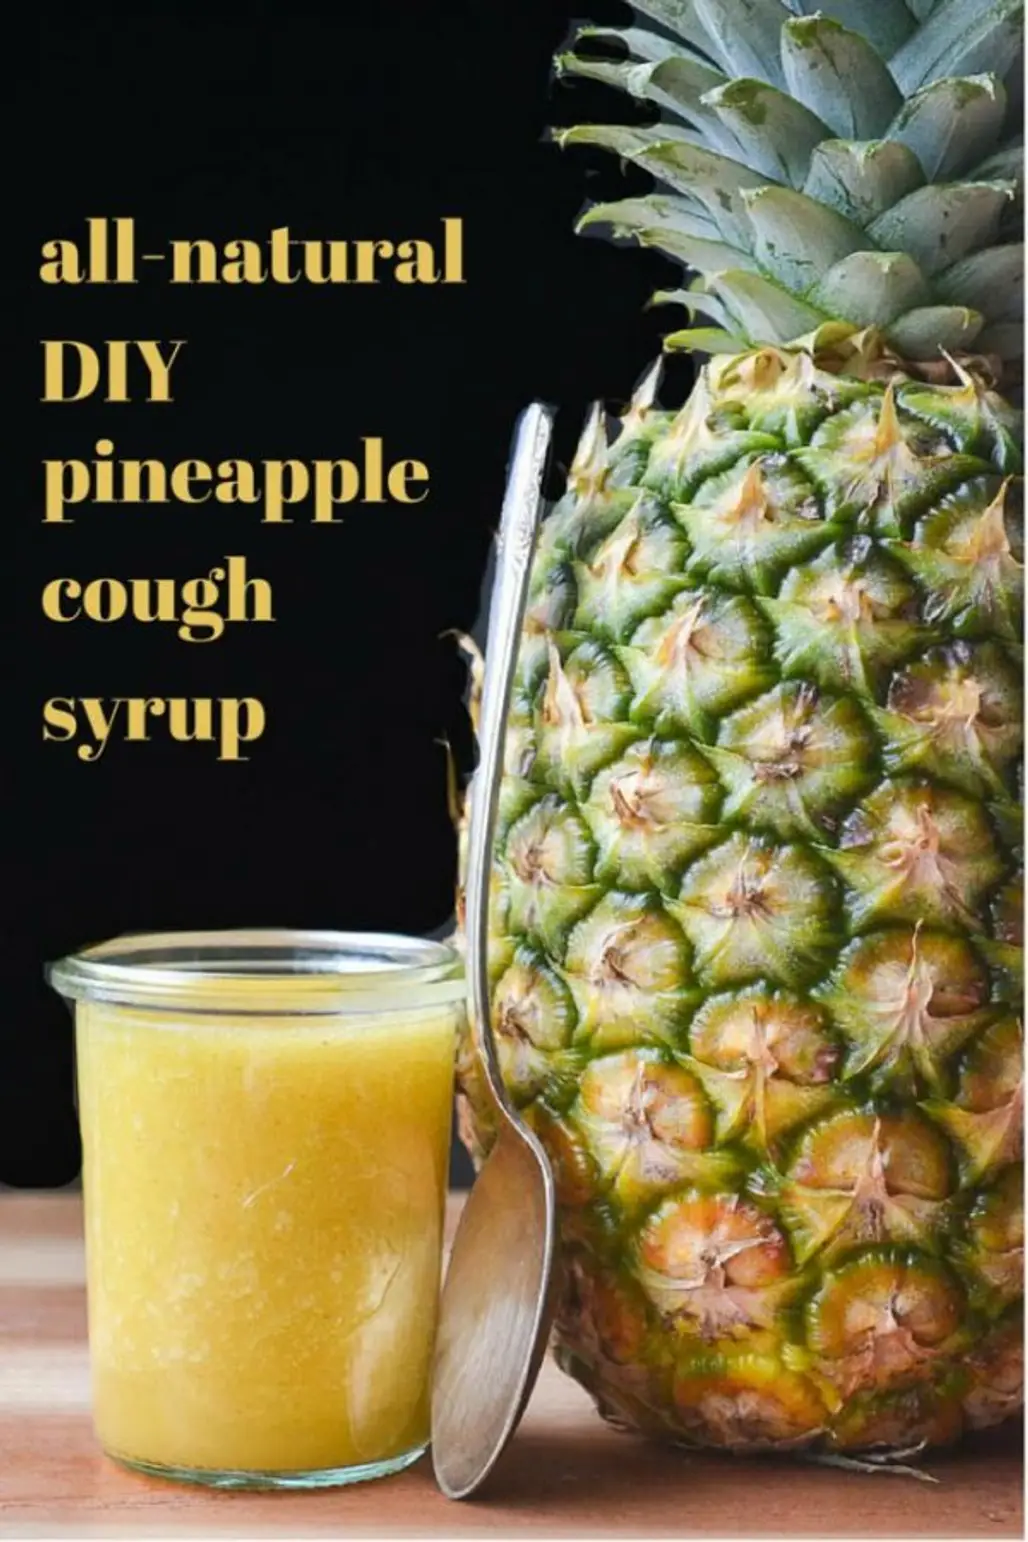 Pineapple Cough Syrup